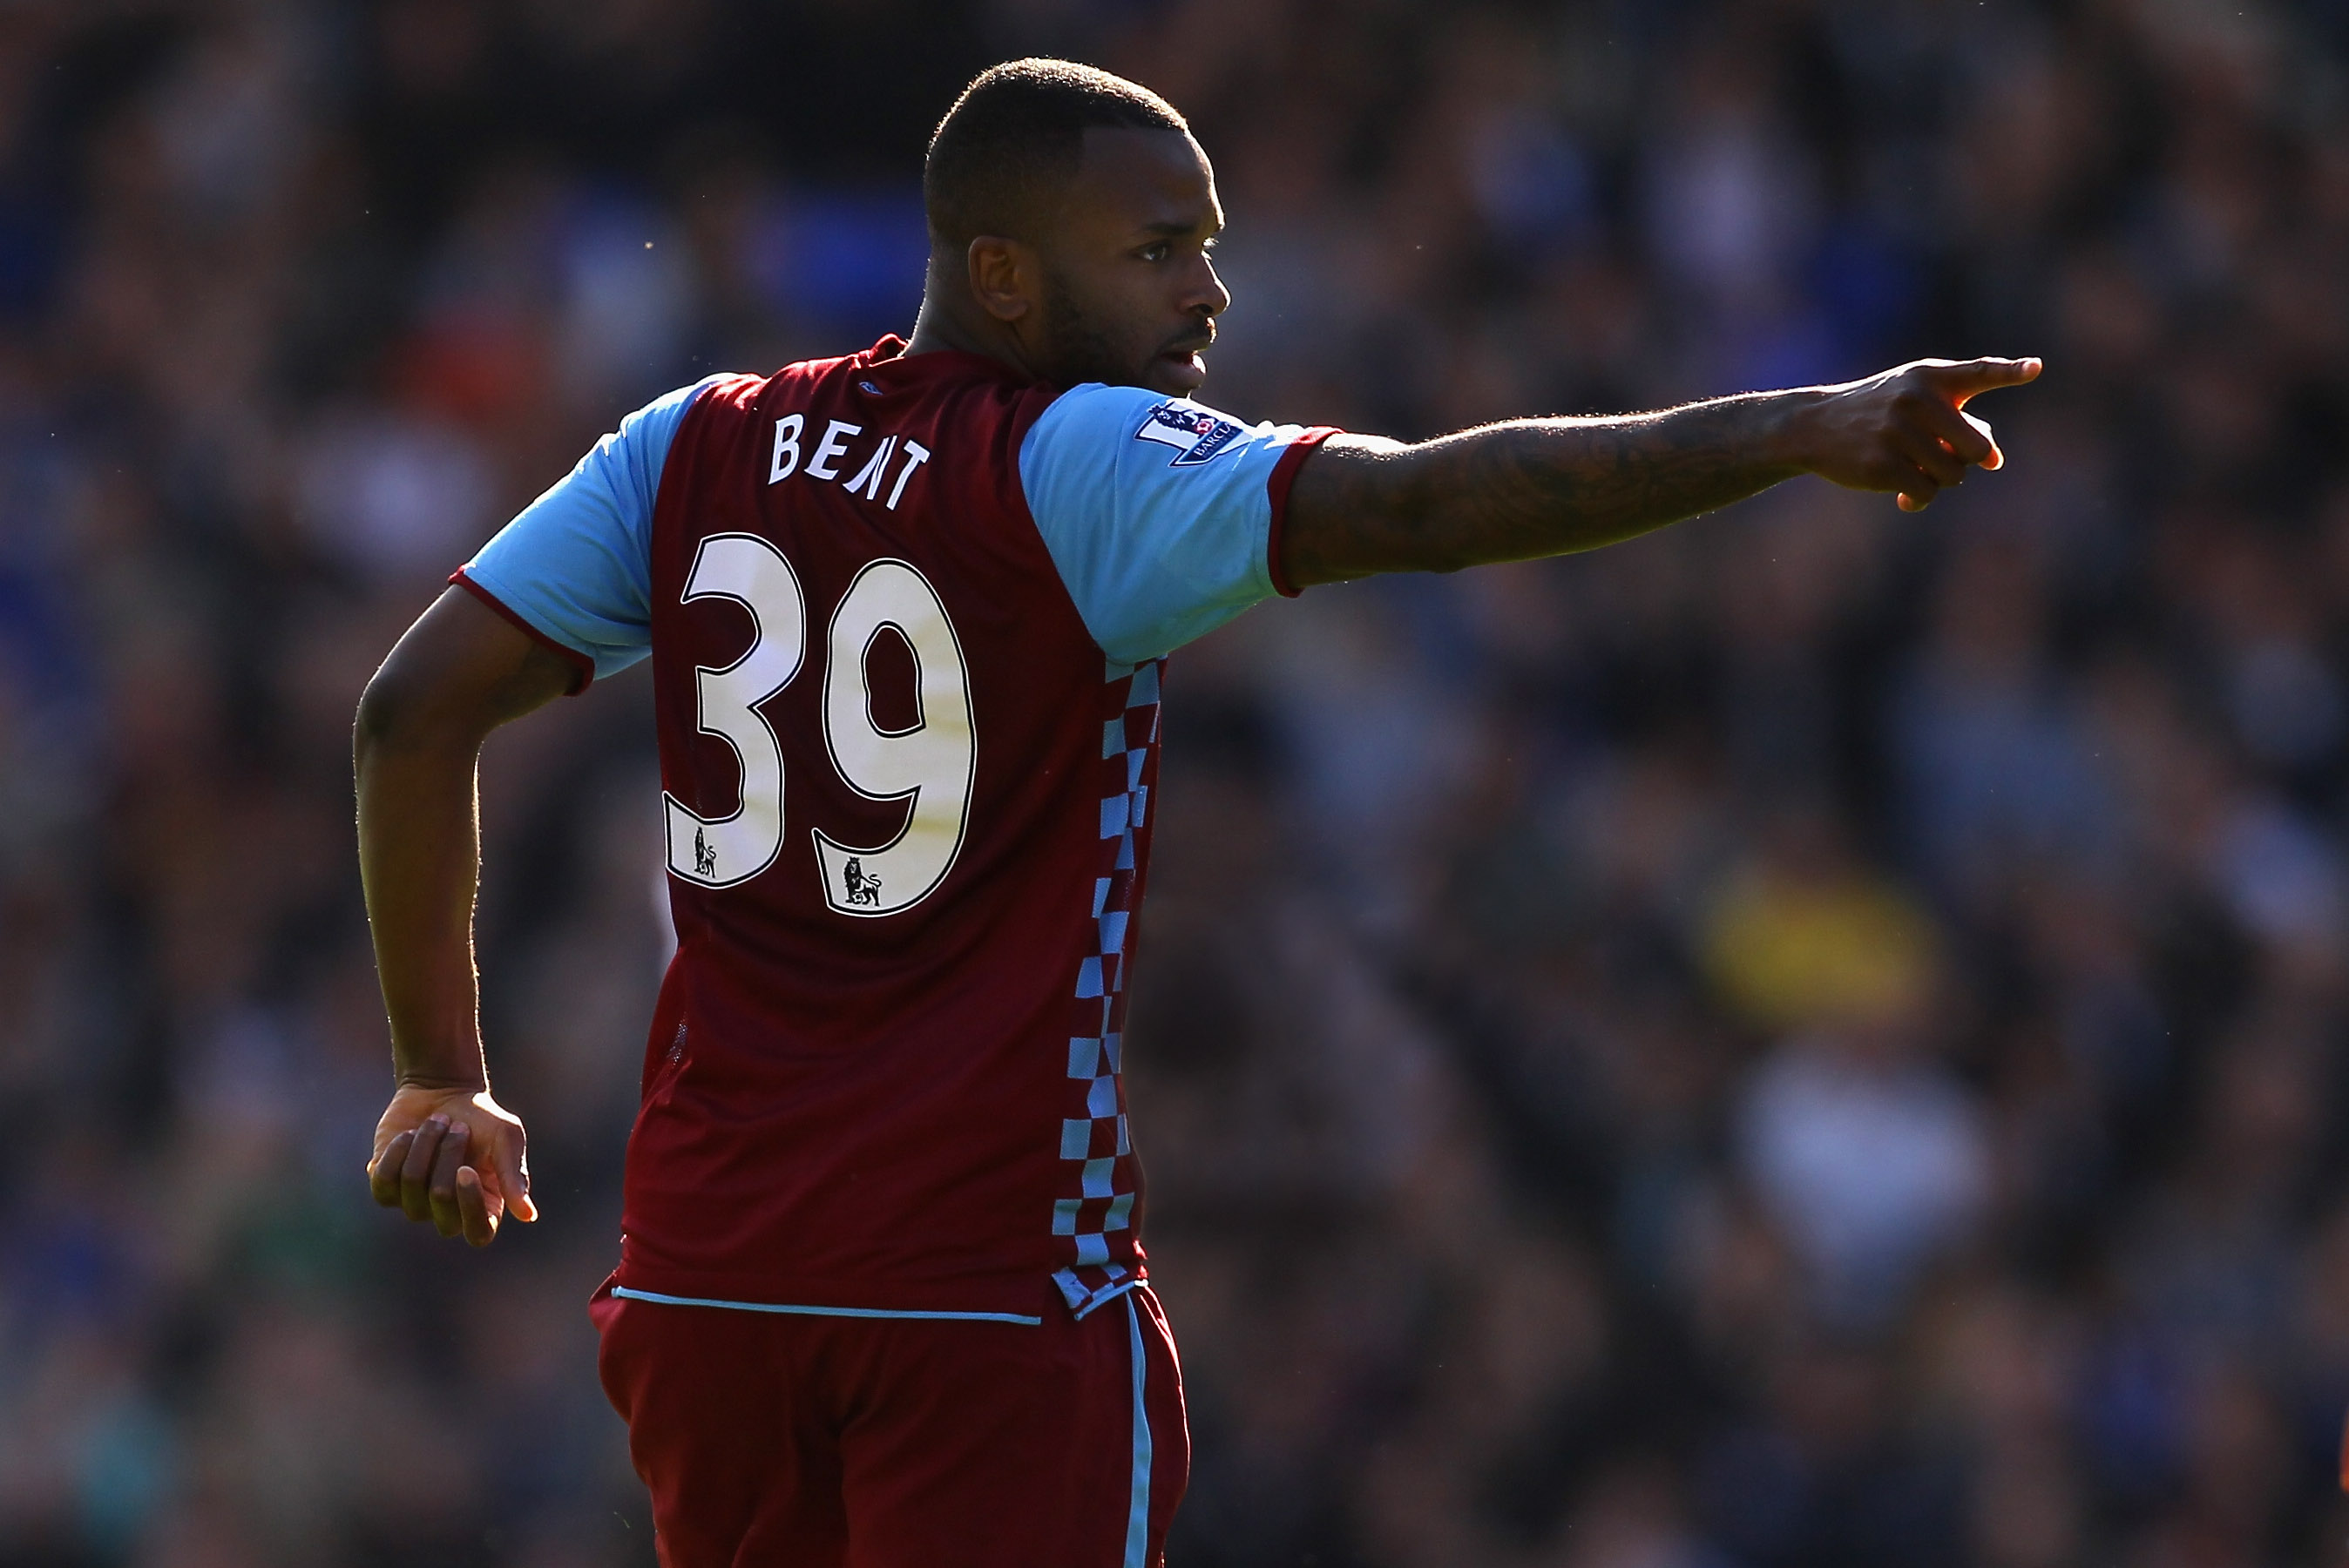 LIVERPOOL, ENGLAND - APRIL 02:  Darren Bent of Aston Villa celebrates after scoring his first goal during the Barclays Premier League match between Everton and Aston Villa at Goodison Park on April 2, 2011 in Liverpool, England.  (Photo by Alex Livesey/Ge